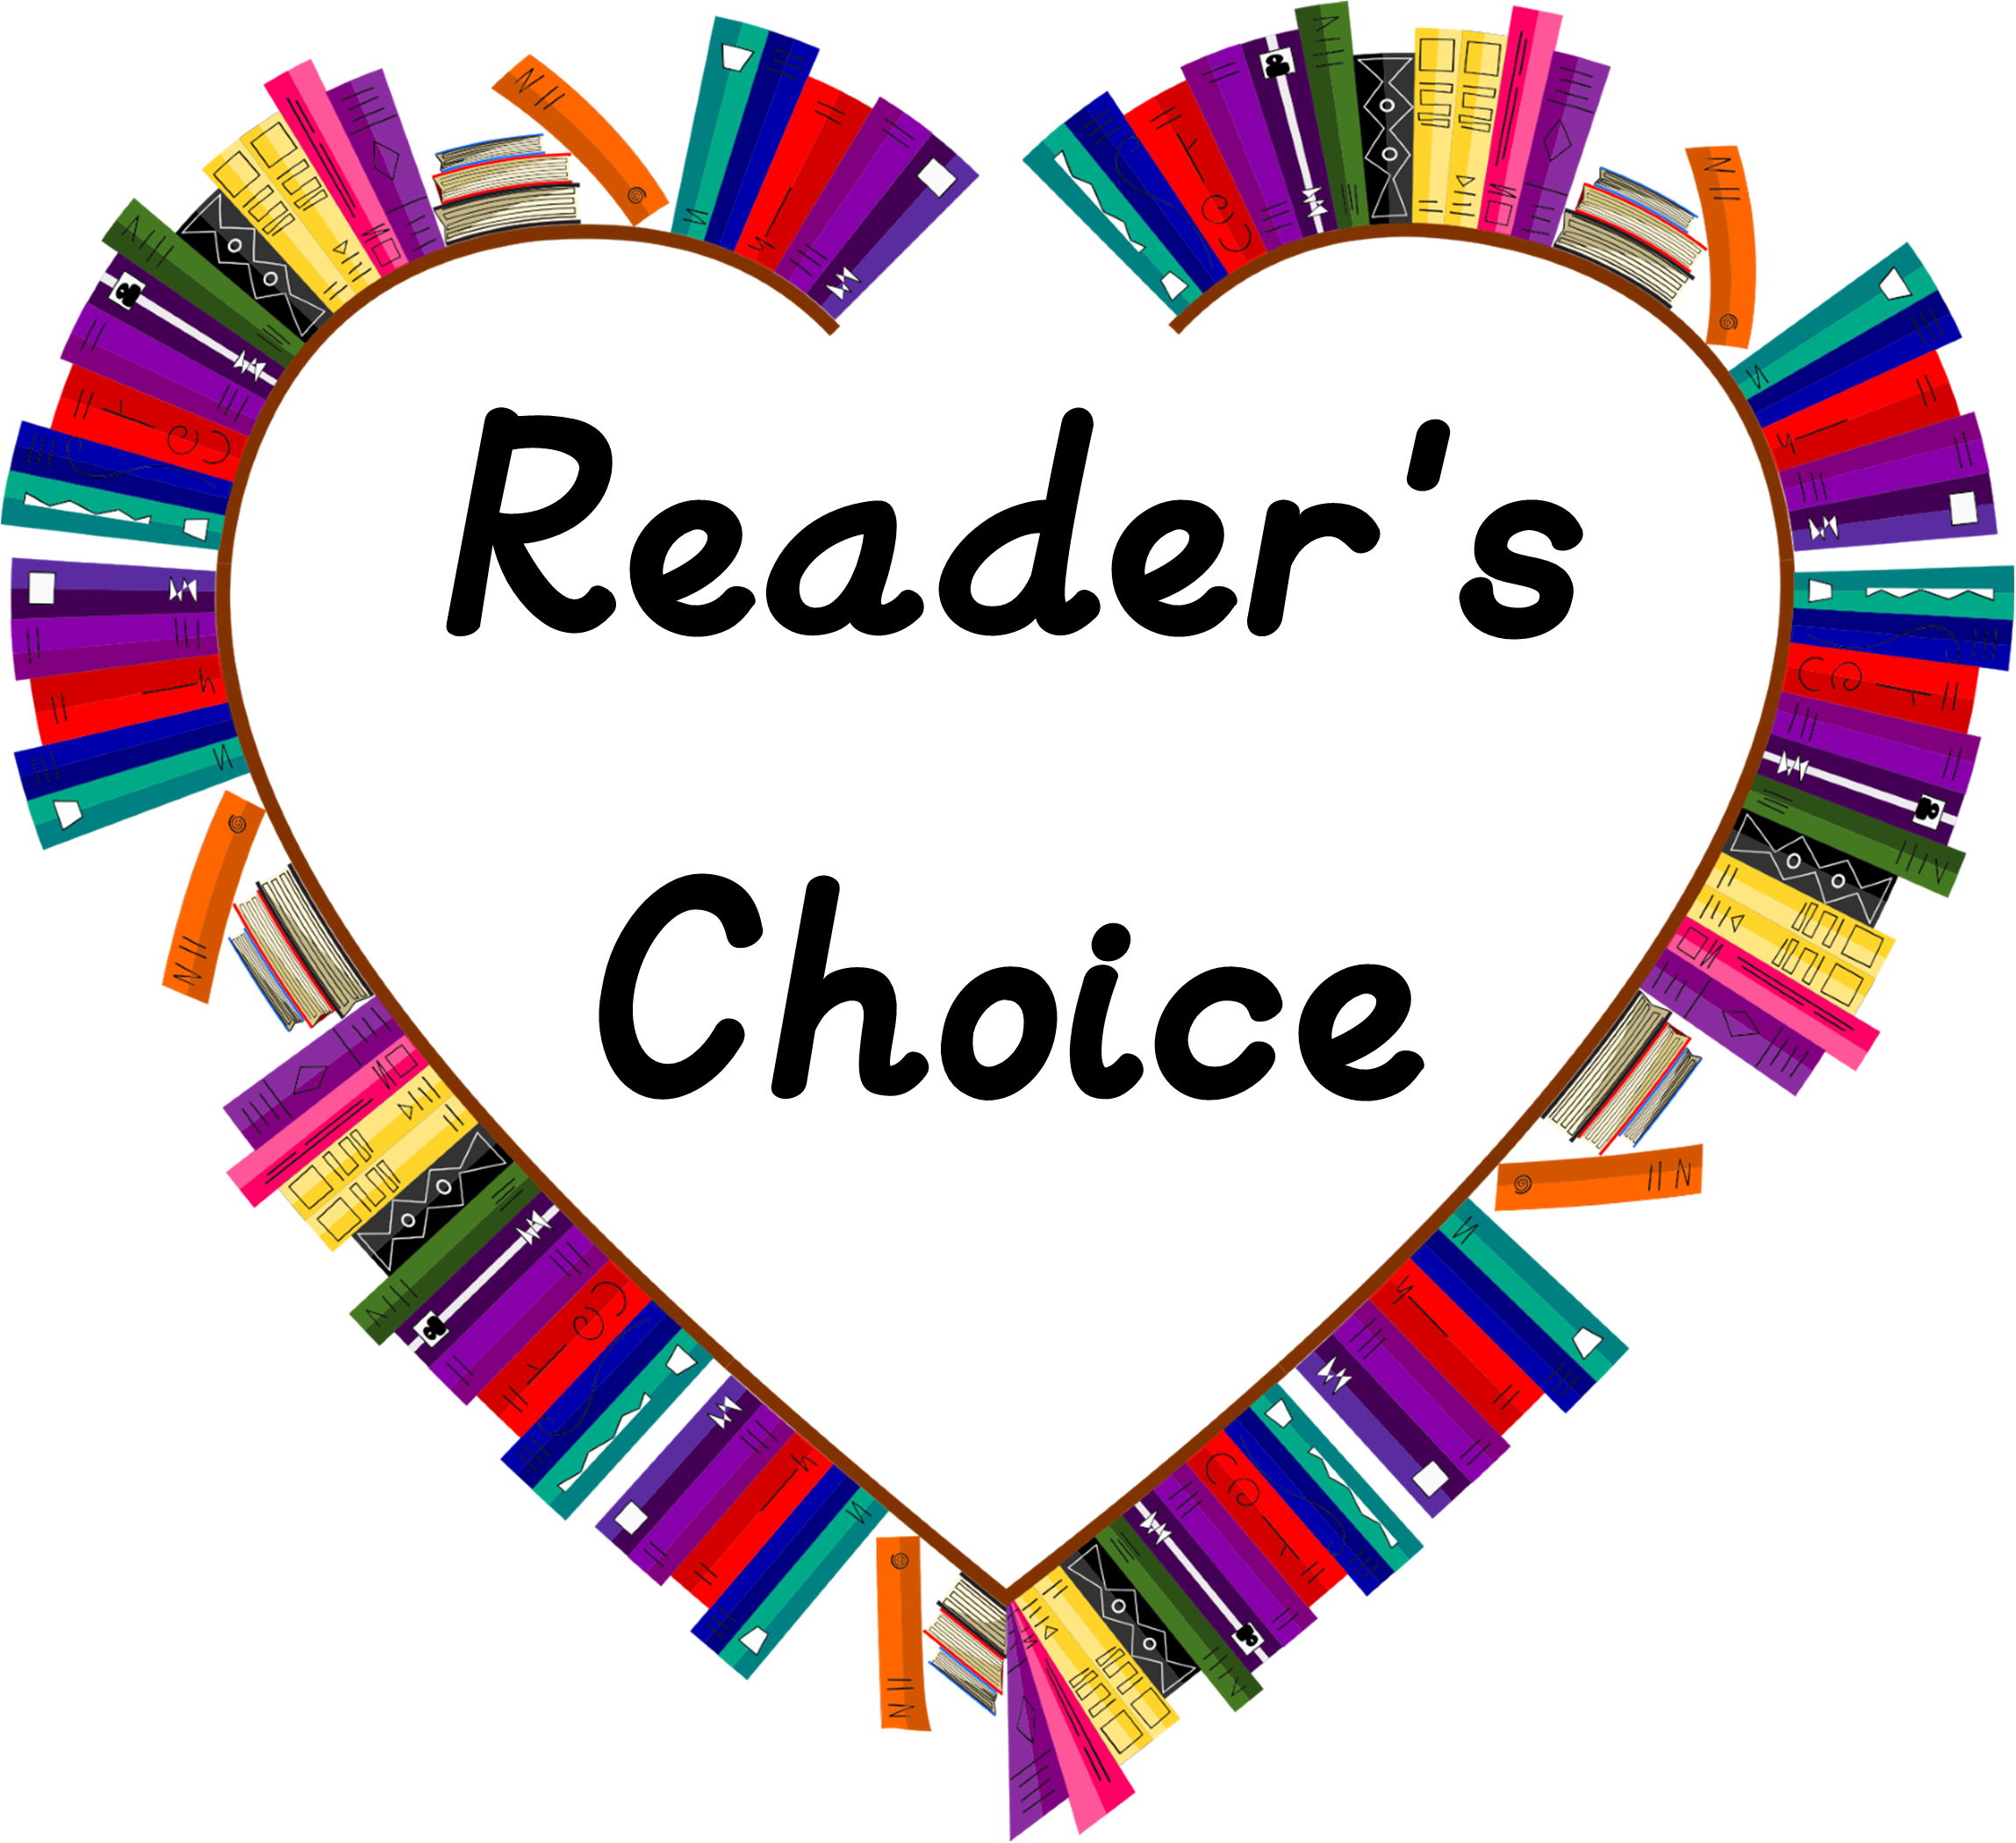 Illustration of books in the shape of a heart with the word's Reader's Choice in the middle.